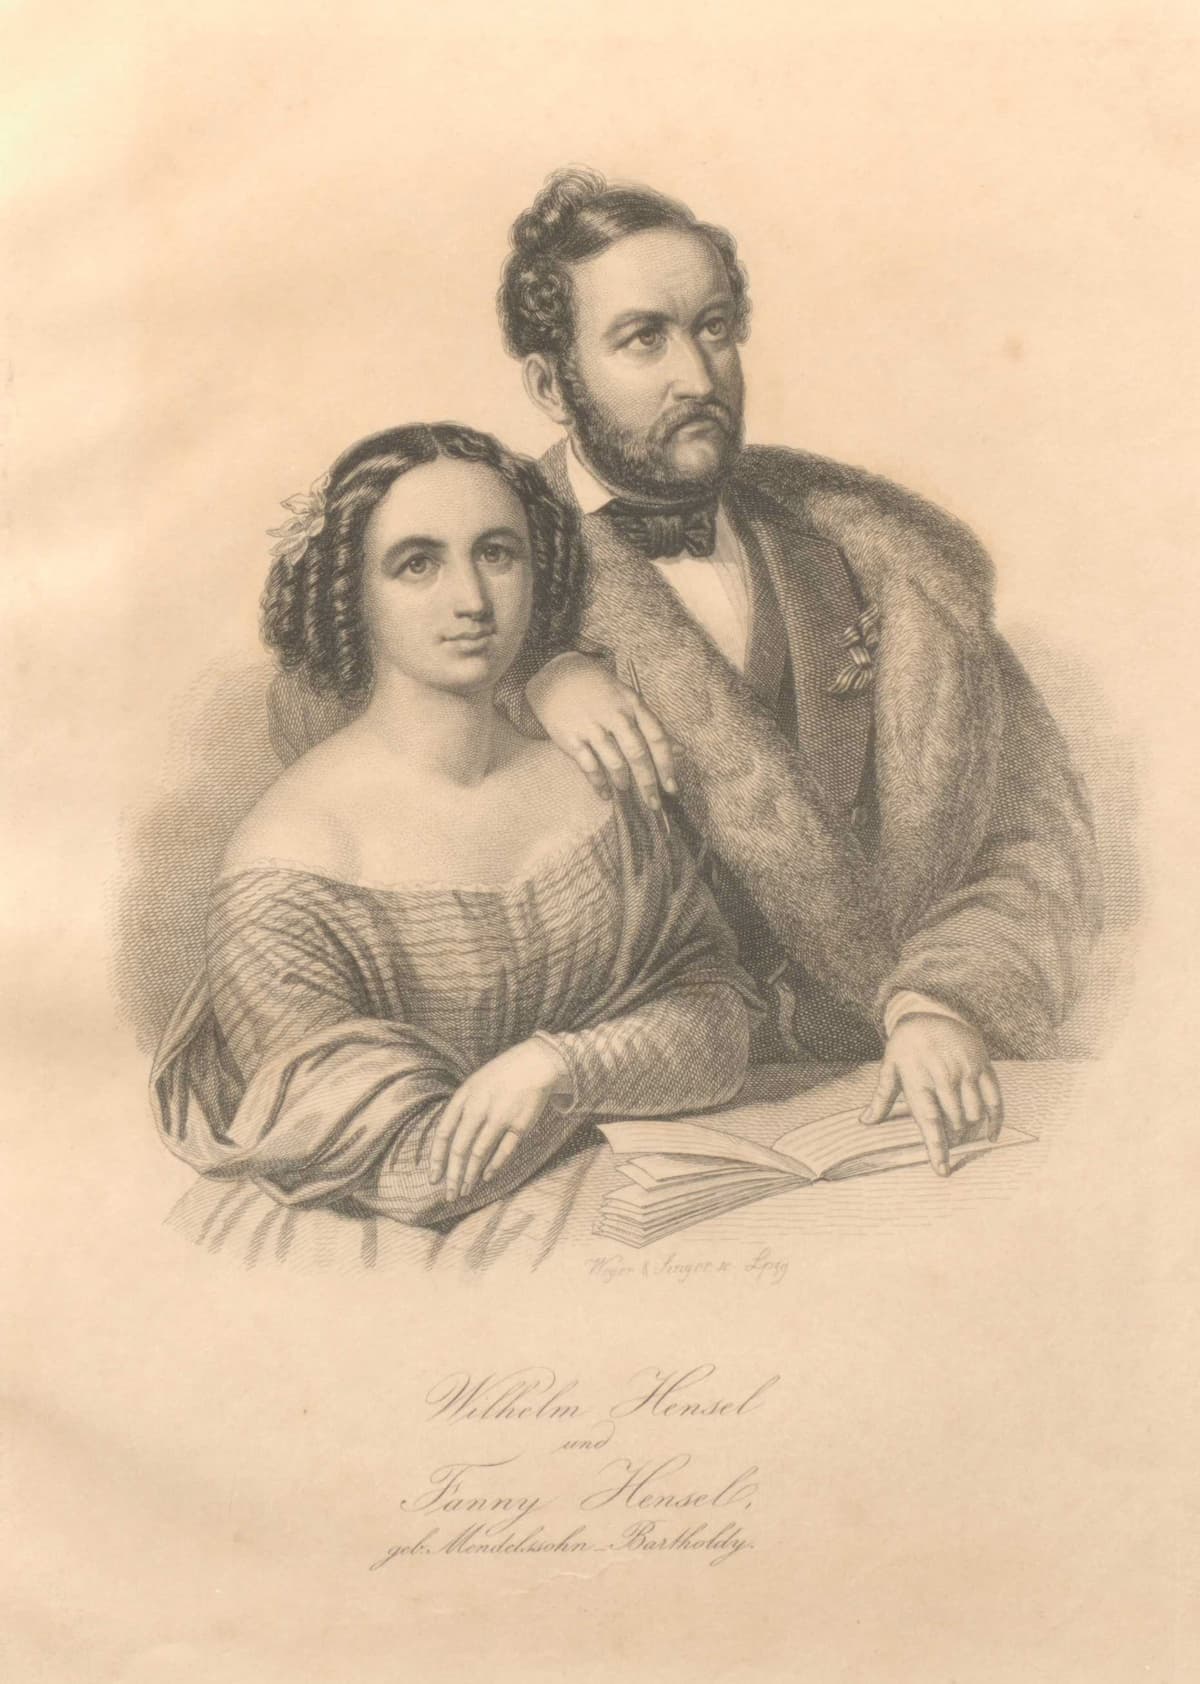 Fanny and Wilhelm Hensel